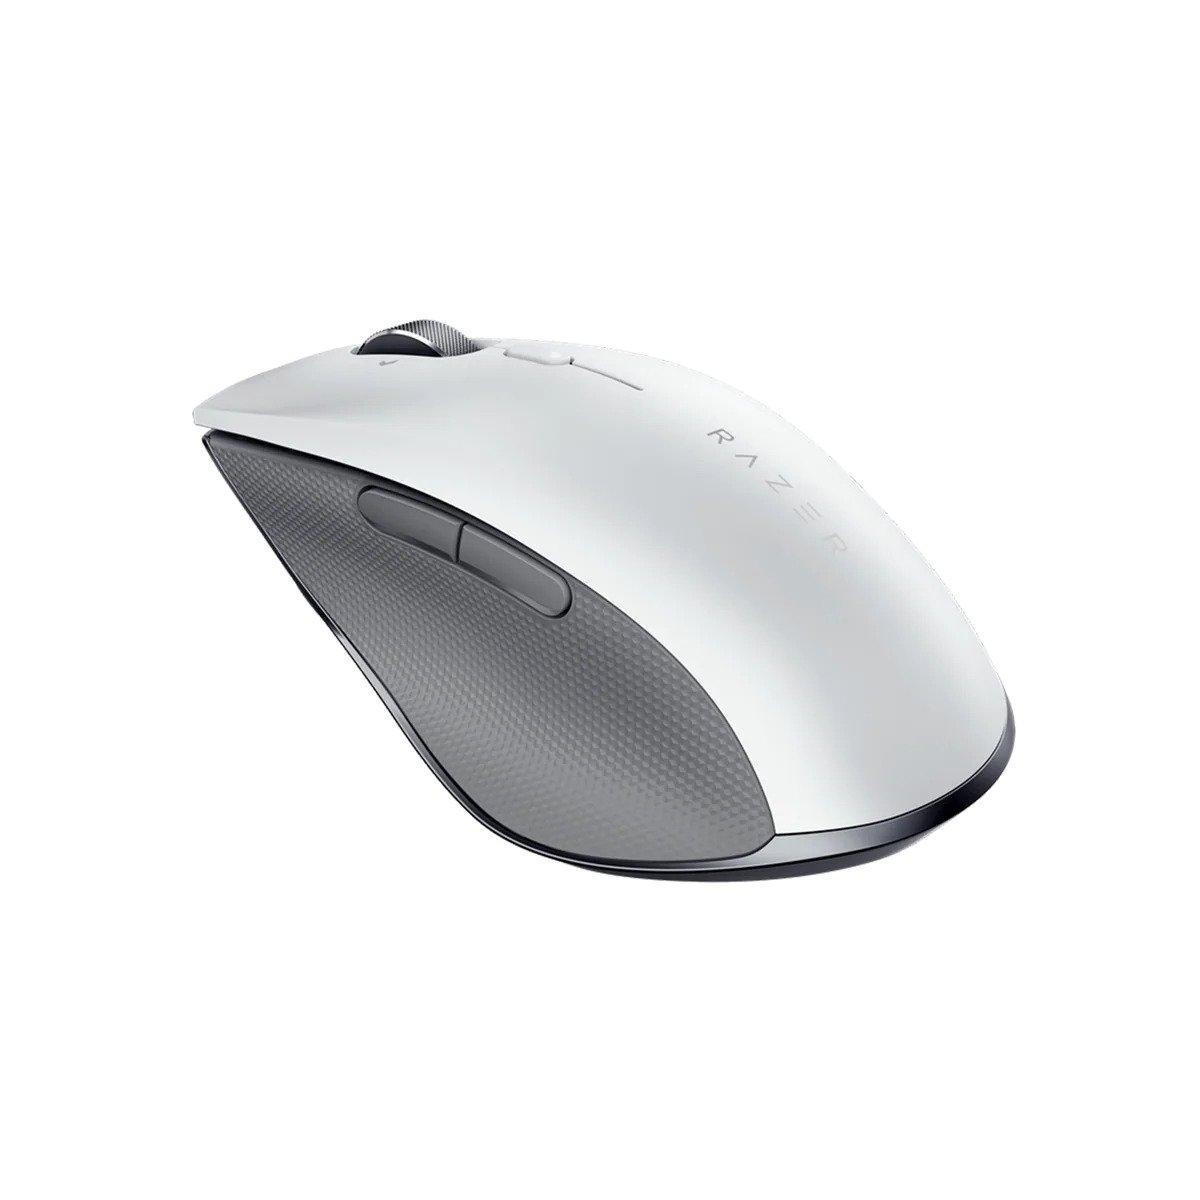 PRO CLICK HUMANSCALE WIRELESS MOUSE